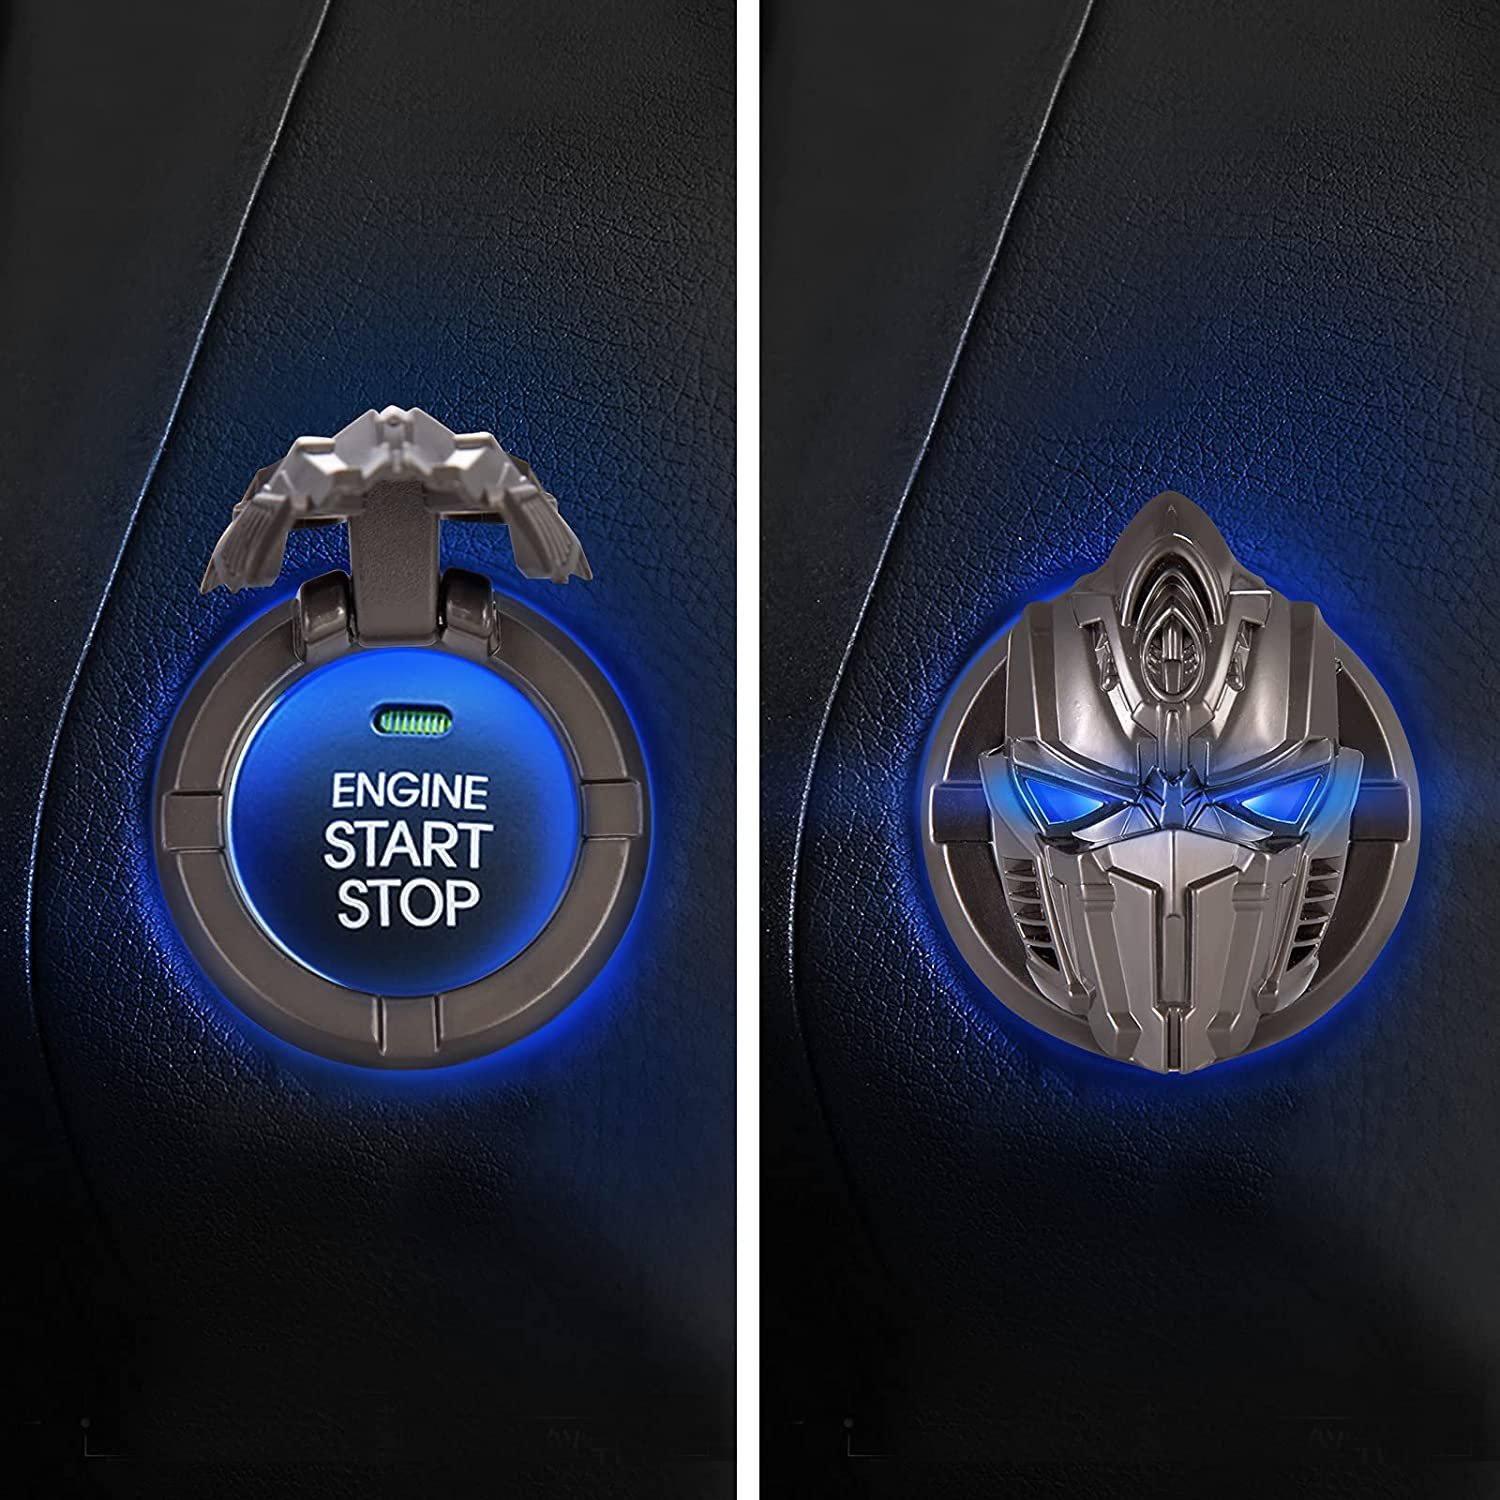 Rotary Car Engine Start Stop Button Gear-Shape, Alloy Metal Ignition Switch Decorative Push start switch Engine Cover (Black) Image 